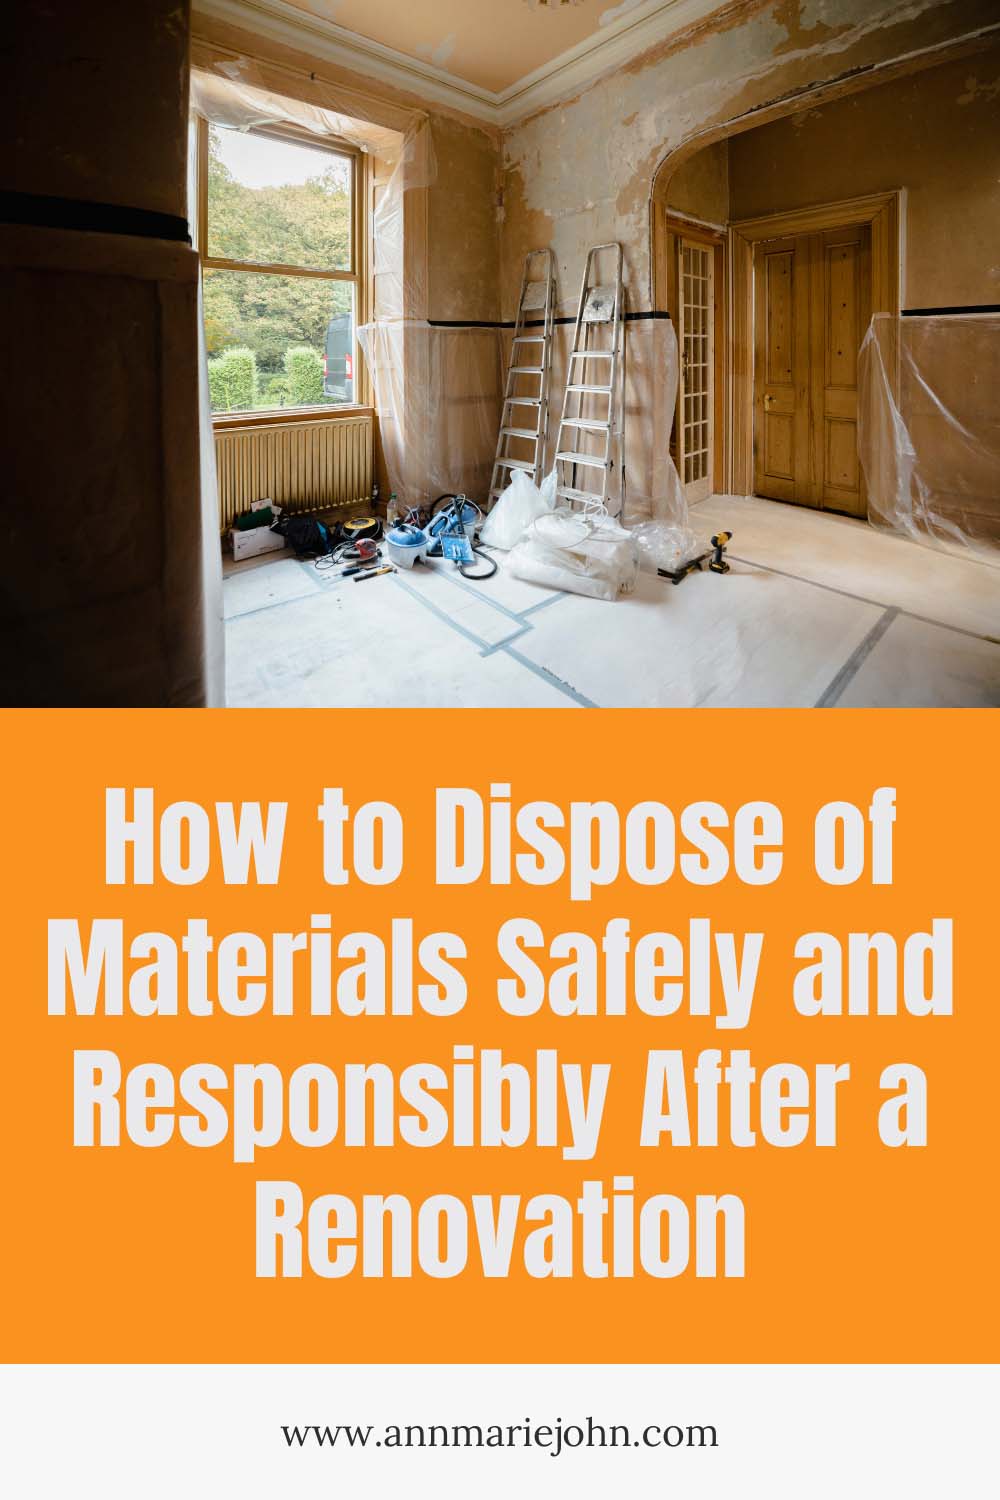 How to Dispose of Materials Safely and Responsibly After a Renovation